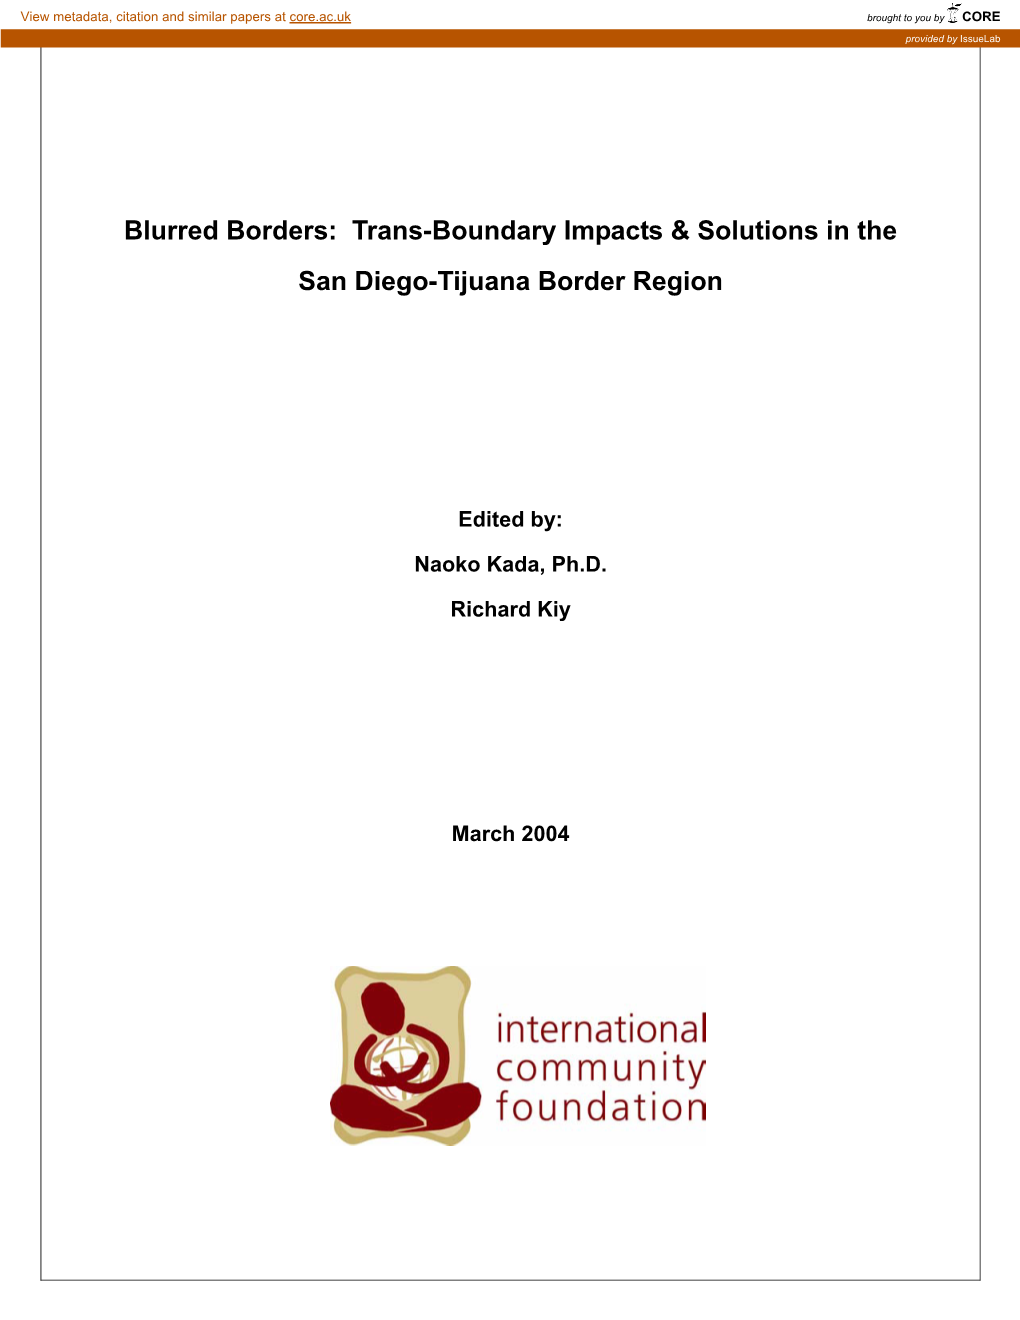 Trans-Boundary Impacts & Solutions in the San Diego-Tijuana